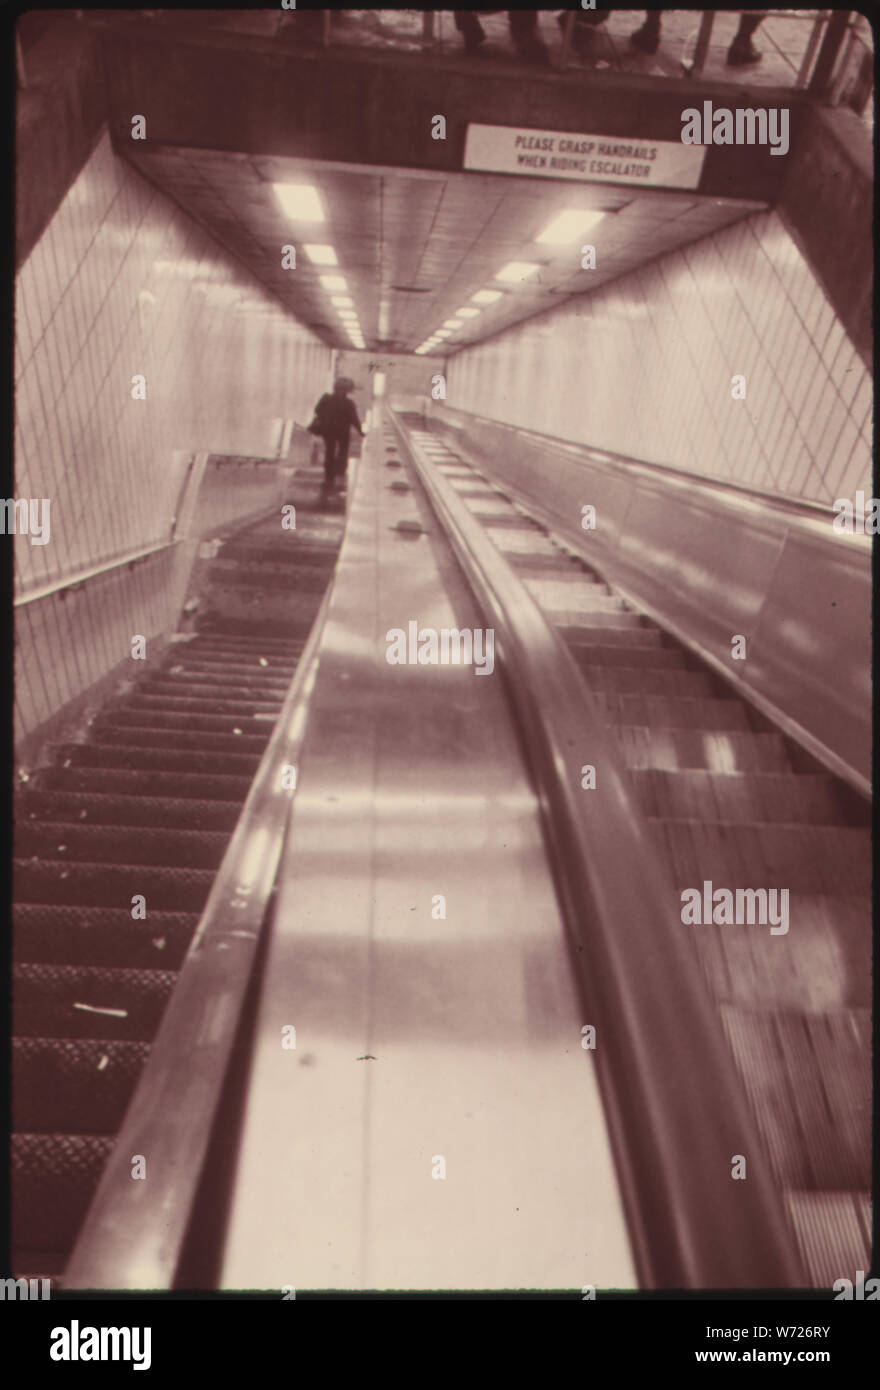 ESCALATOR TRANSPORTS PASSENGERS FAR BELOW THE CITY STREETS TO THE LEXINGTON AVENUE LINE SUBWAY OPERATED BY THE NEW YORK CITY TRANSIT AUTHORITY. THE SYSTEM TRANSMITS SLIGHTLY LESS THAN TWO MILLION PEOPLE TO AND FROM WORK EACH DAY. DESPITE THE CRITICAL IMPORTANCE OF THE SUBWAY FOR COMMUTING, VOTERS HAVE REFUSED TO AUTHORIZE NEW FUNDS FOR ANY MORE IMPROVEMENTS, OR TO ALLOW THE 35-CENT FARE TO BE INCREASED TO COVER OPERATING COSTS Stock Photo